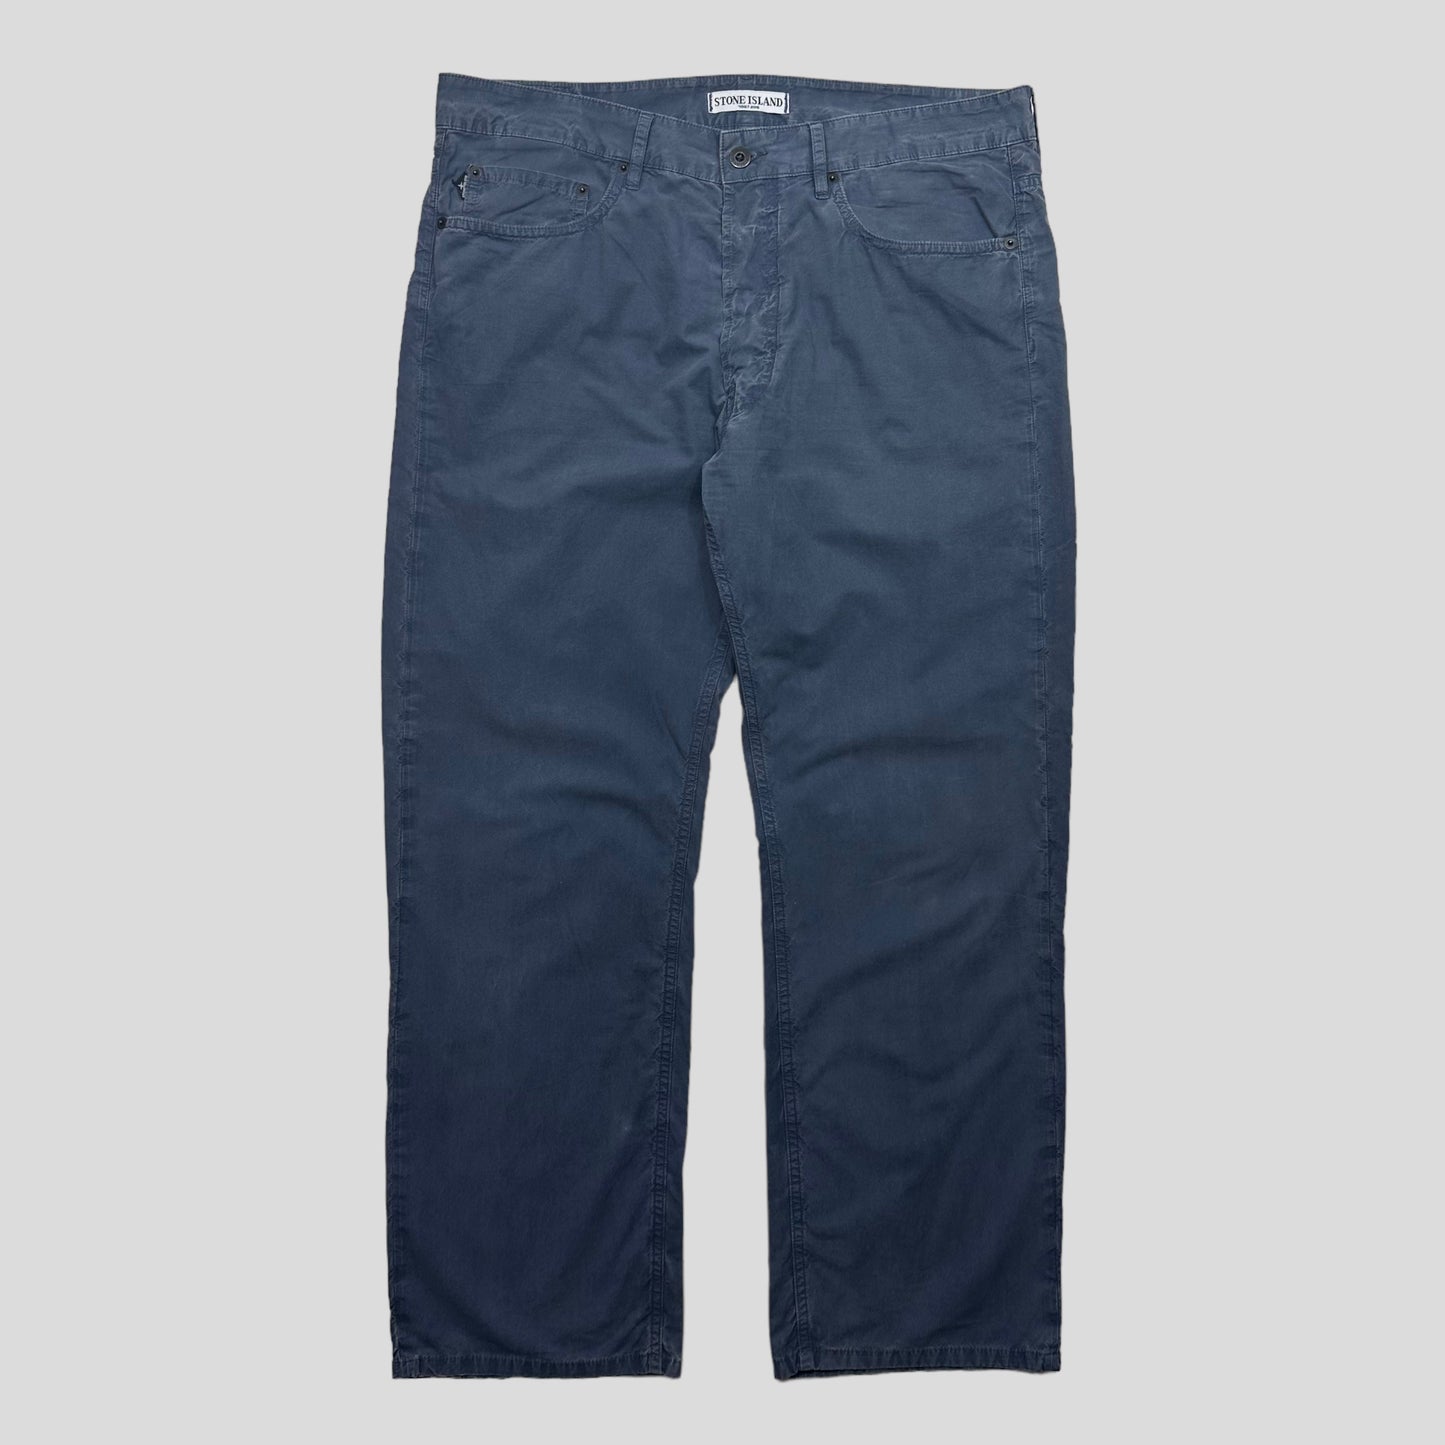 Stone Island SS10 Baggy Cotton Trousers - 34-36